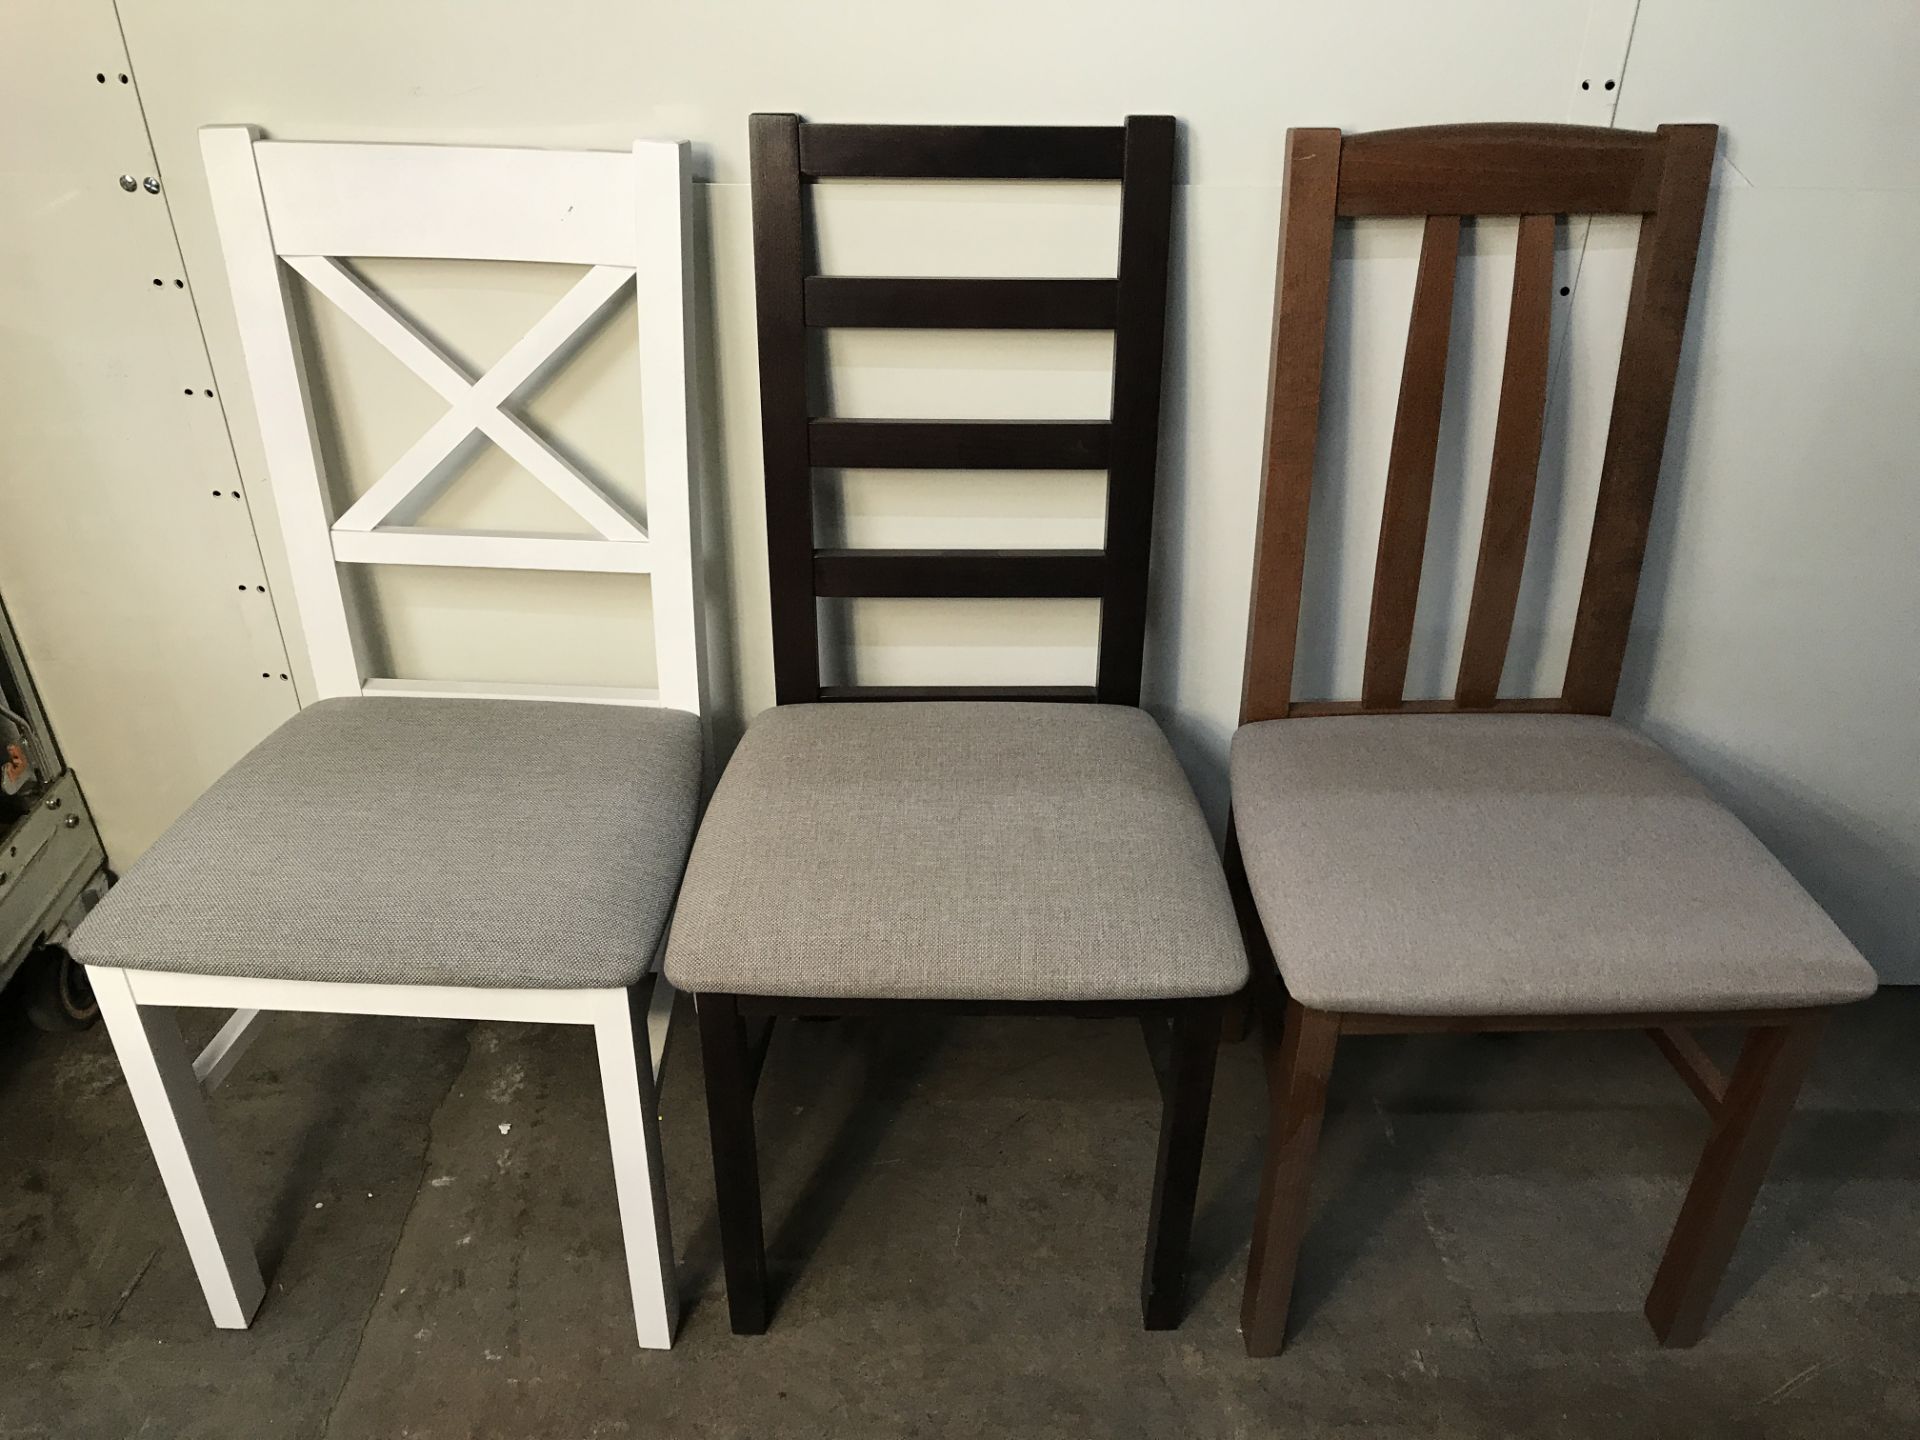 3 x Wooden Dining Chairs